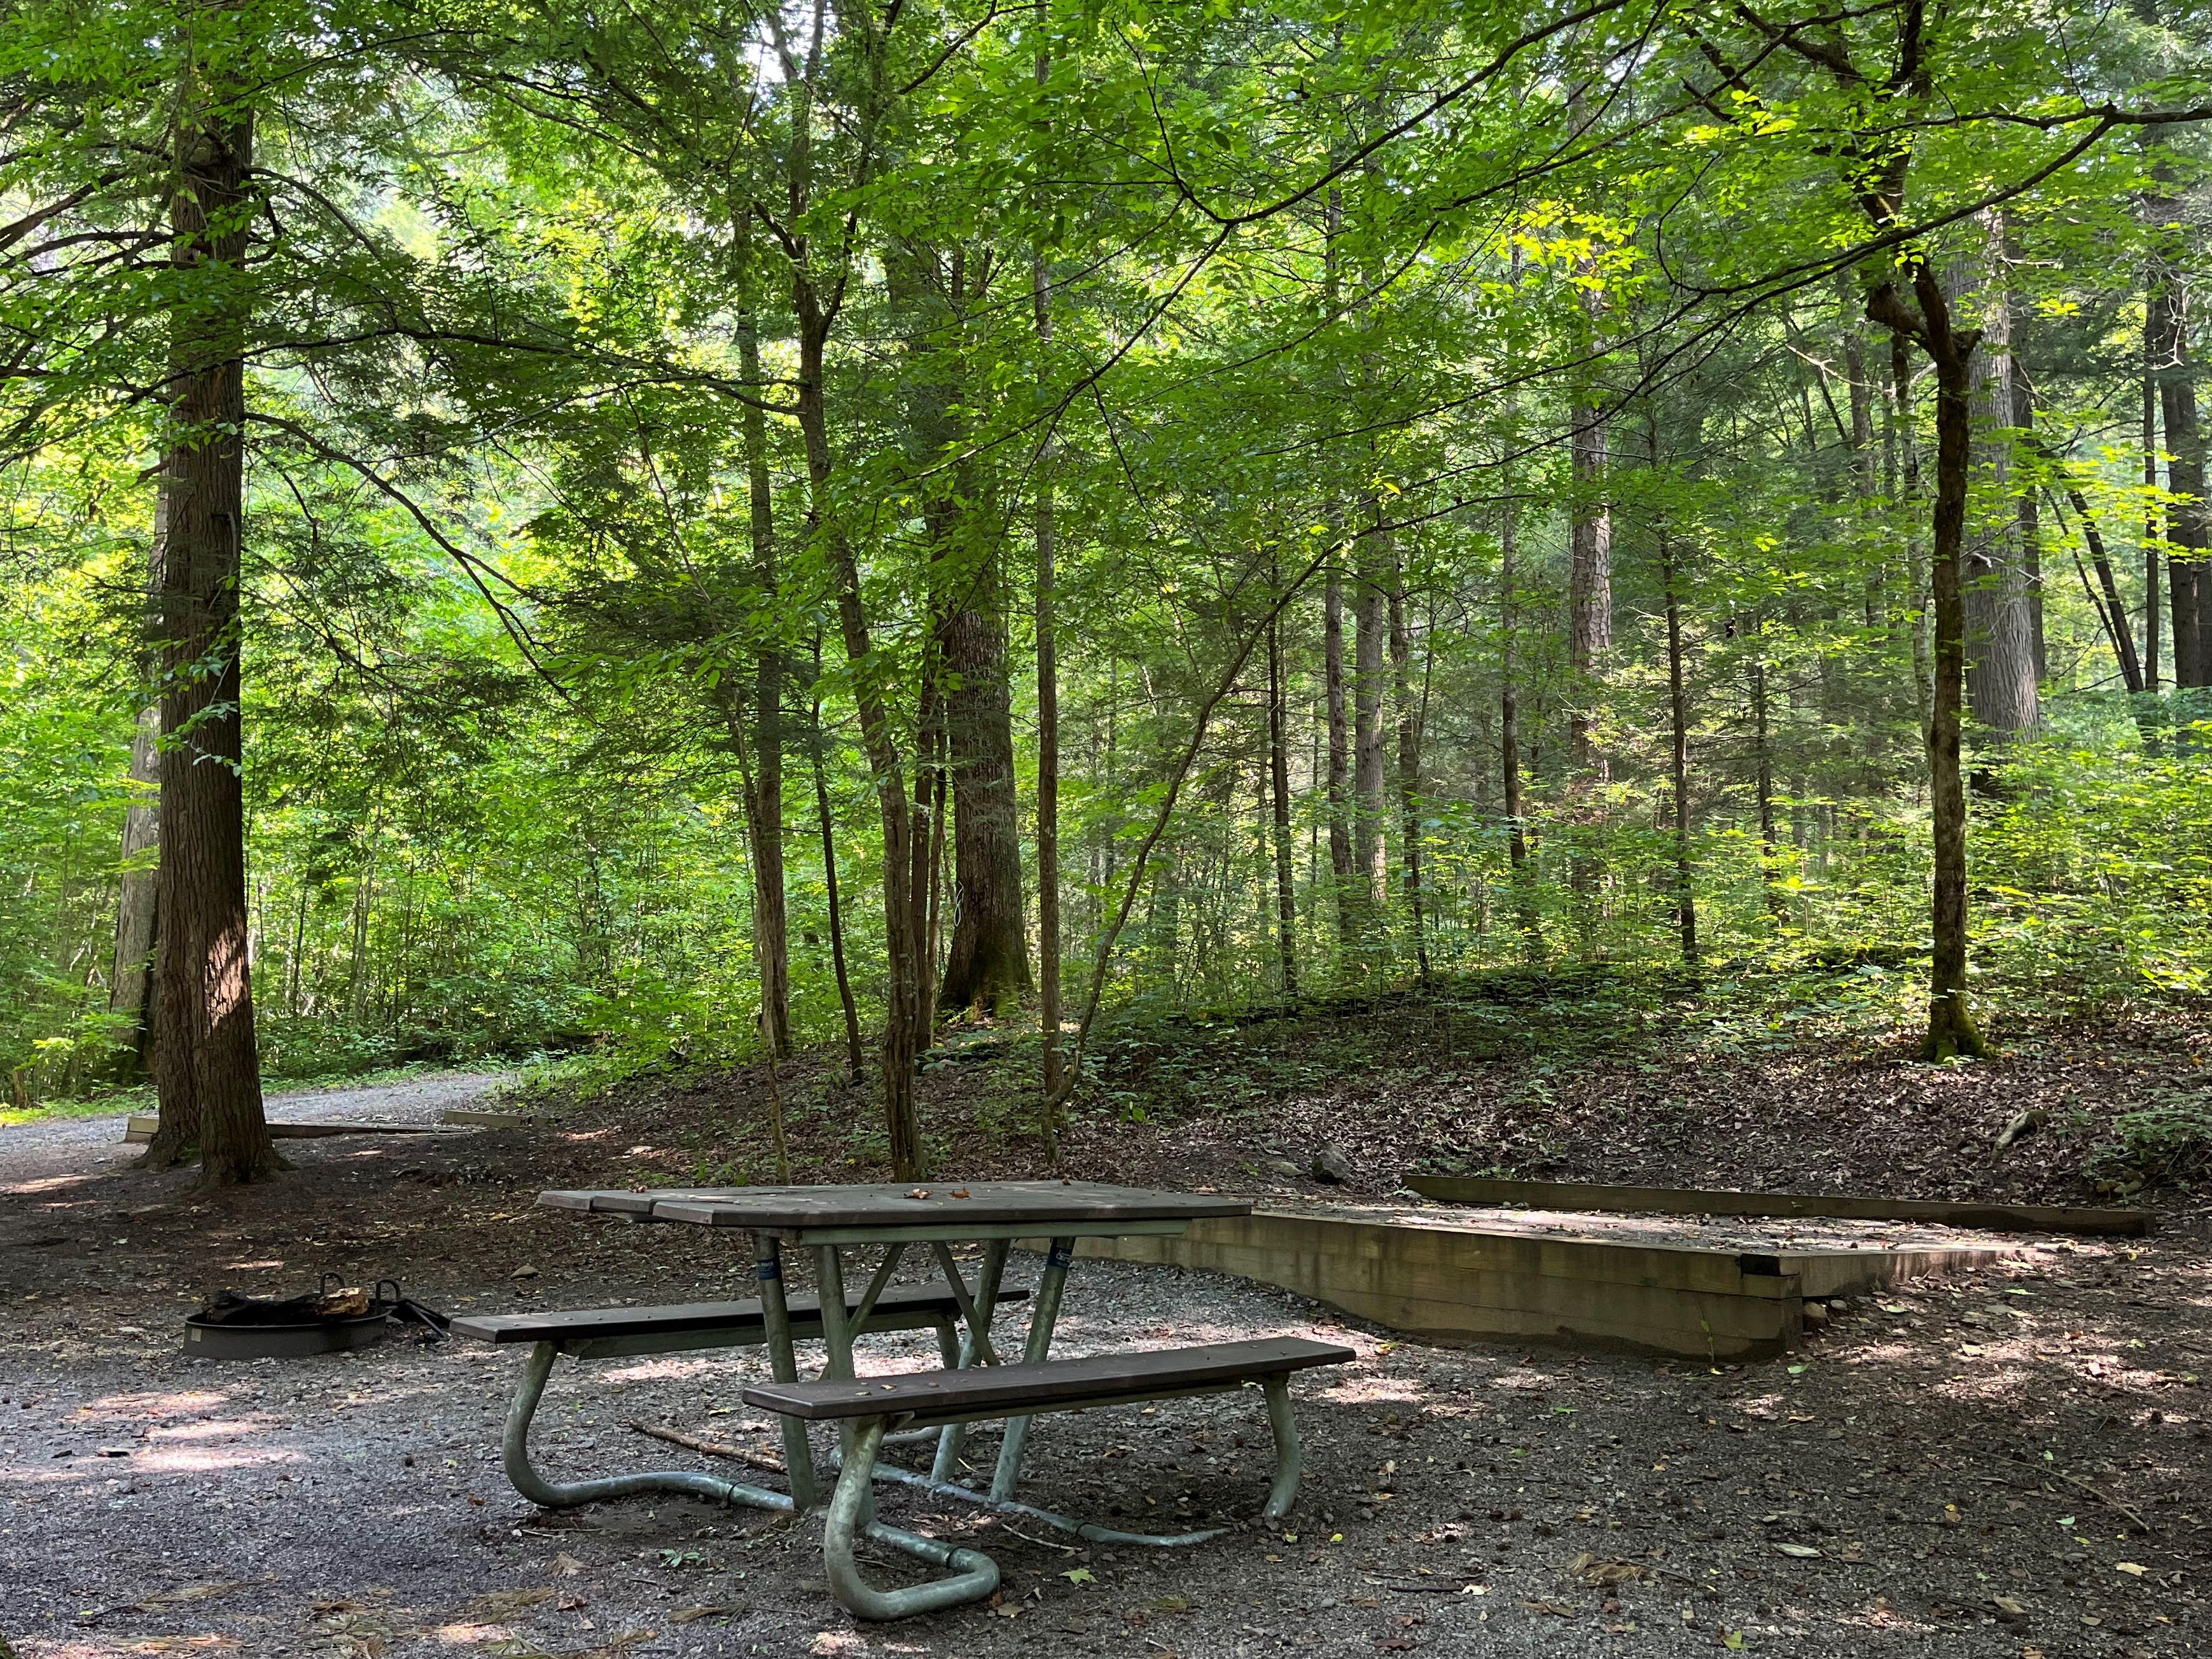 A forested campsite with a tent pad, picnic table, and grill. A nearby tent pad is visible.